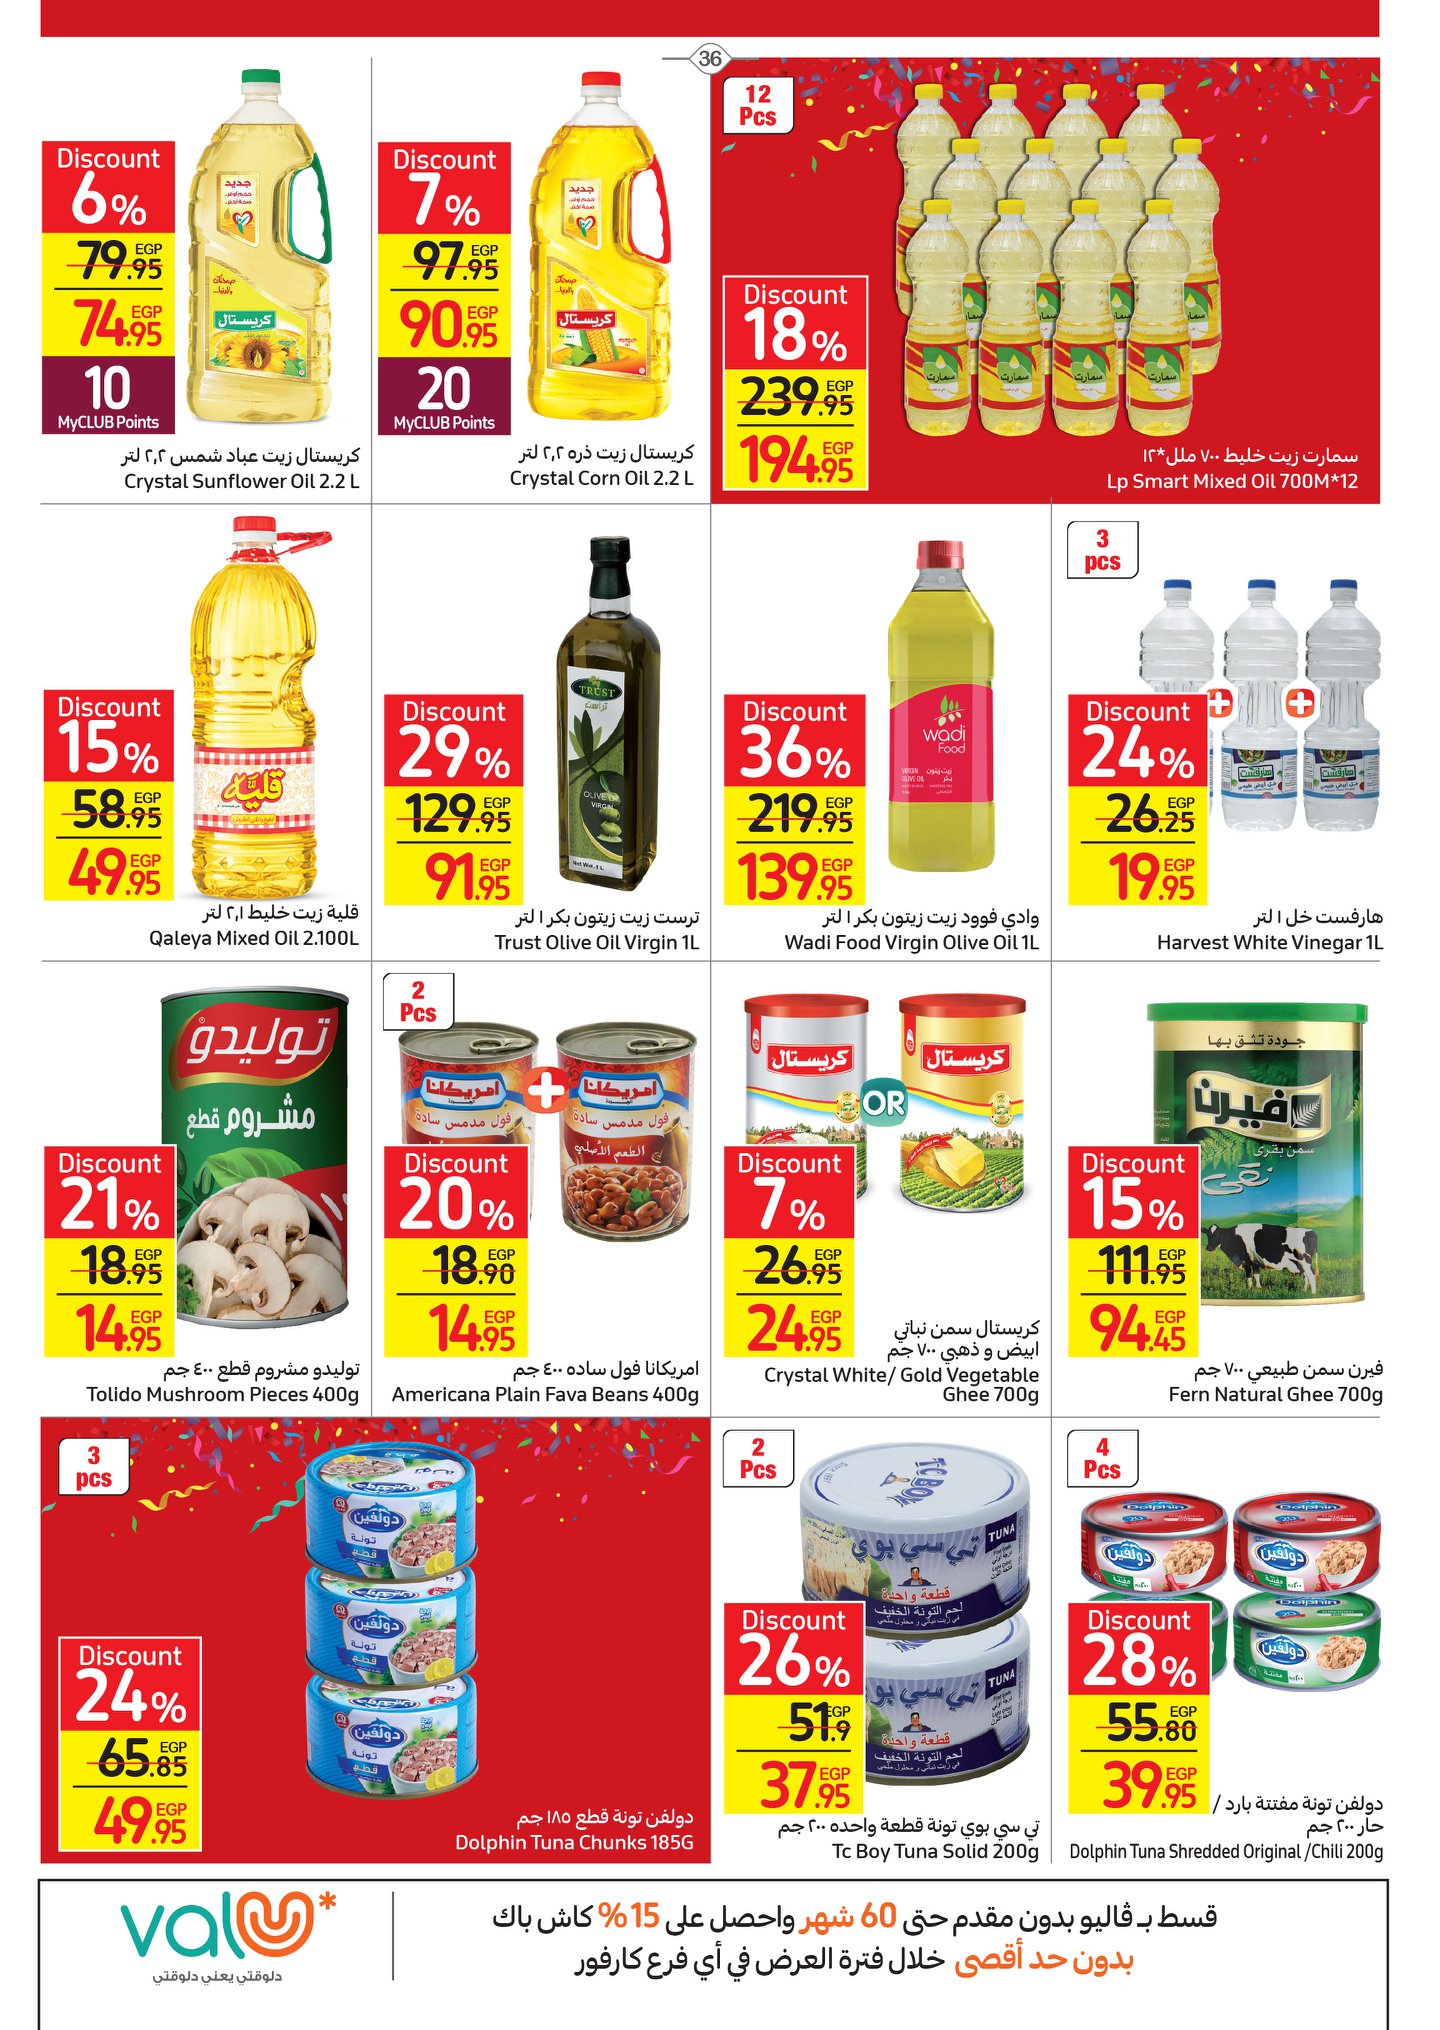 Carrefour magazine offers complete with 50% discounts and a surprise purchase in convenient installments without interest 42